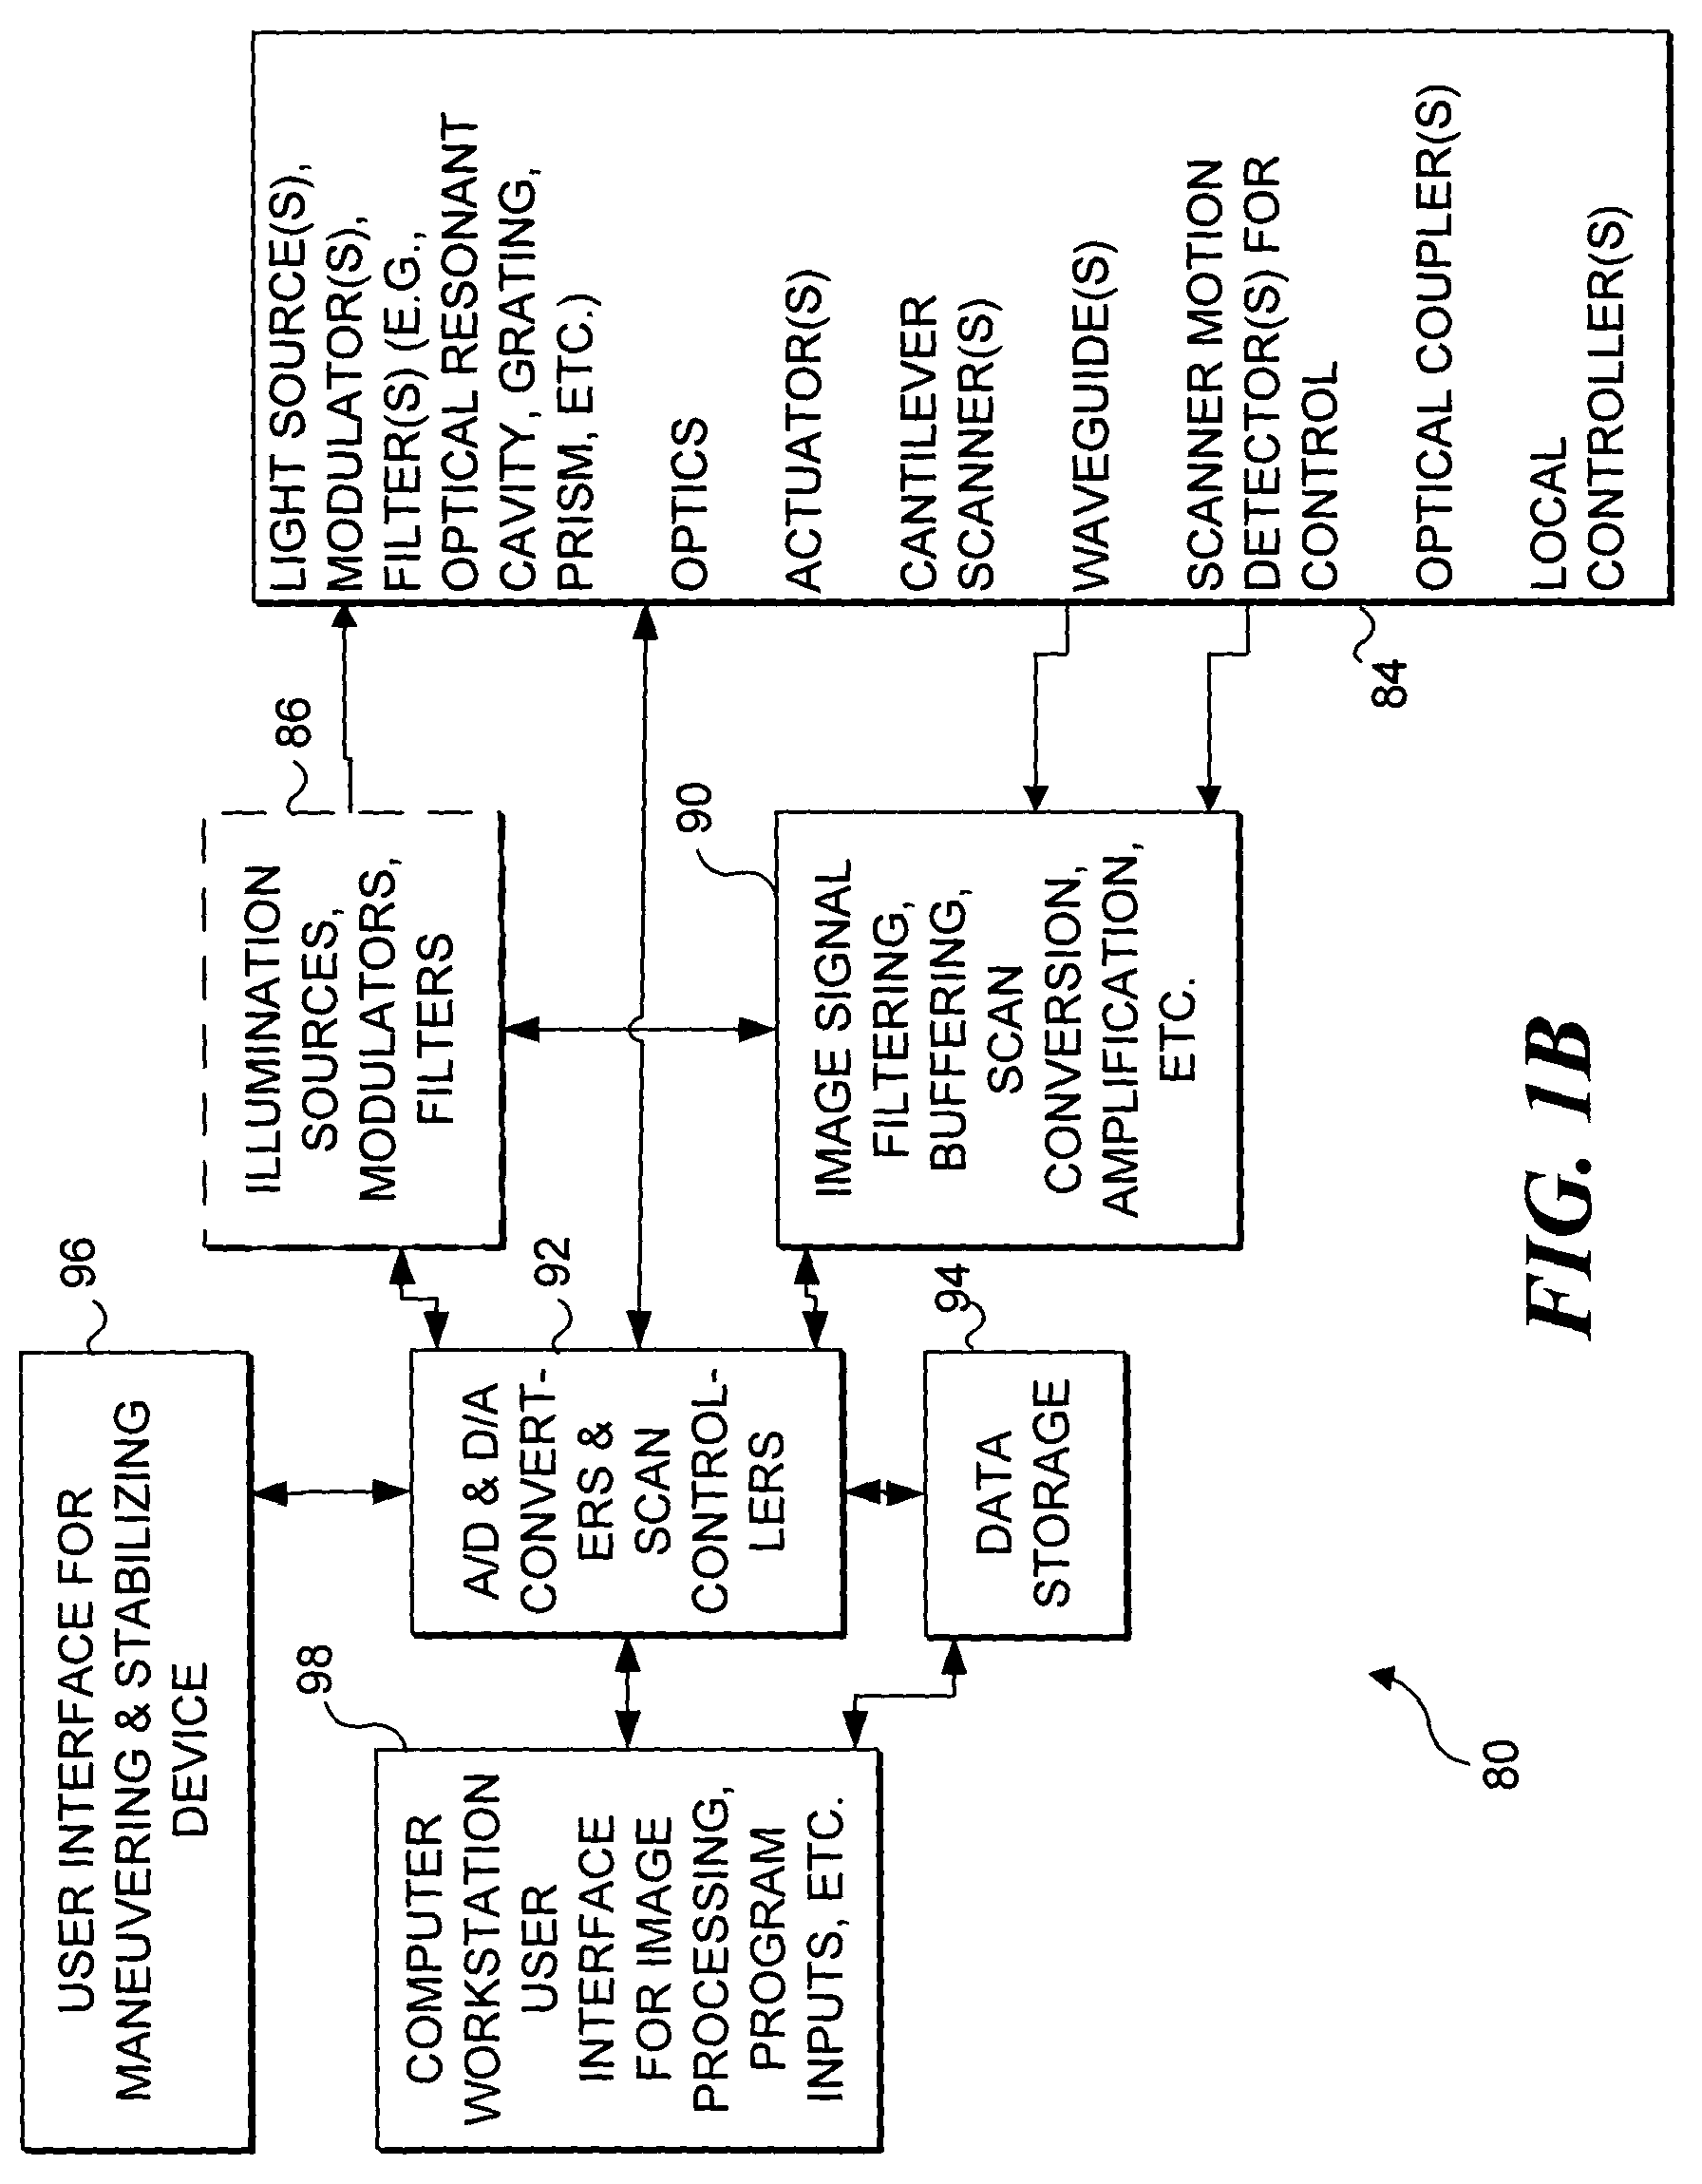 Integrated optical scanning image acquisition and display